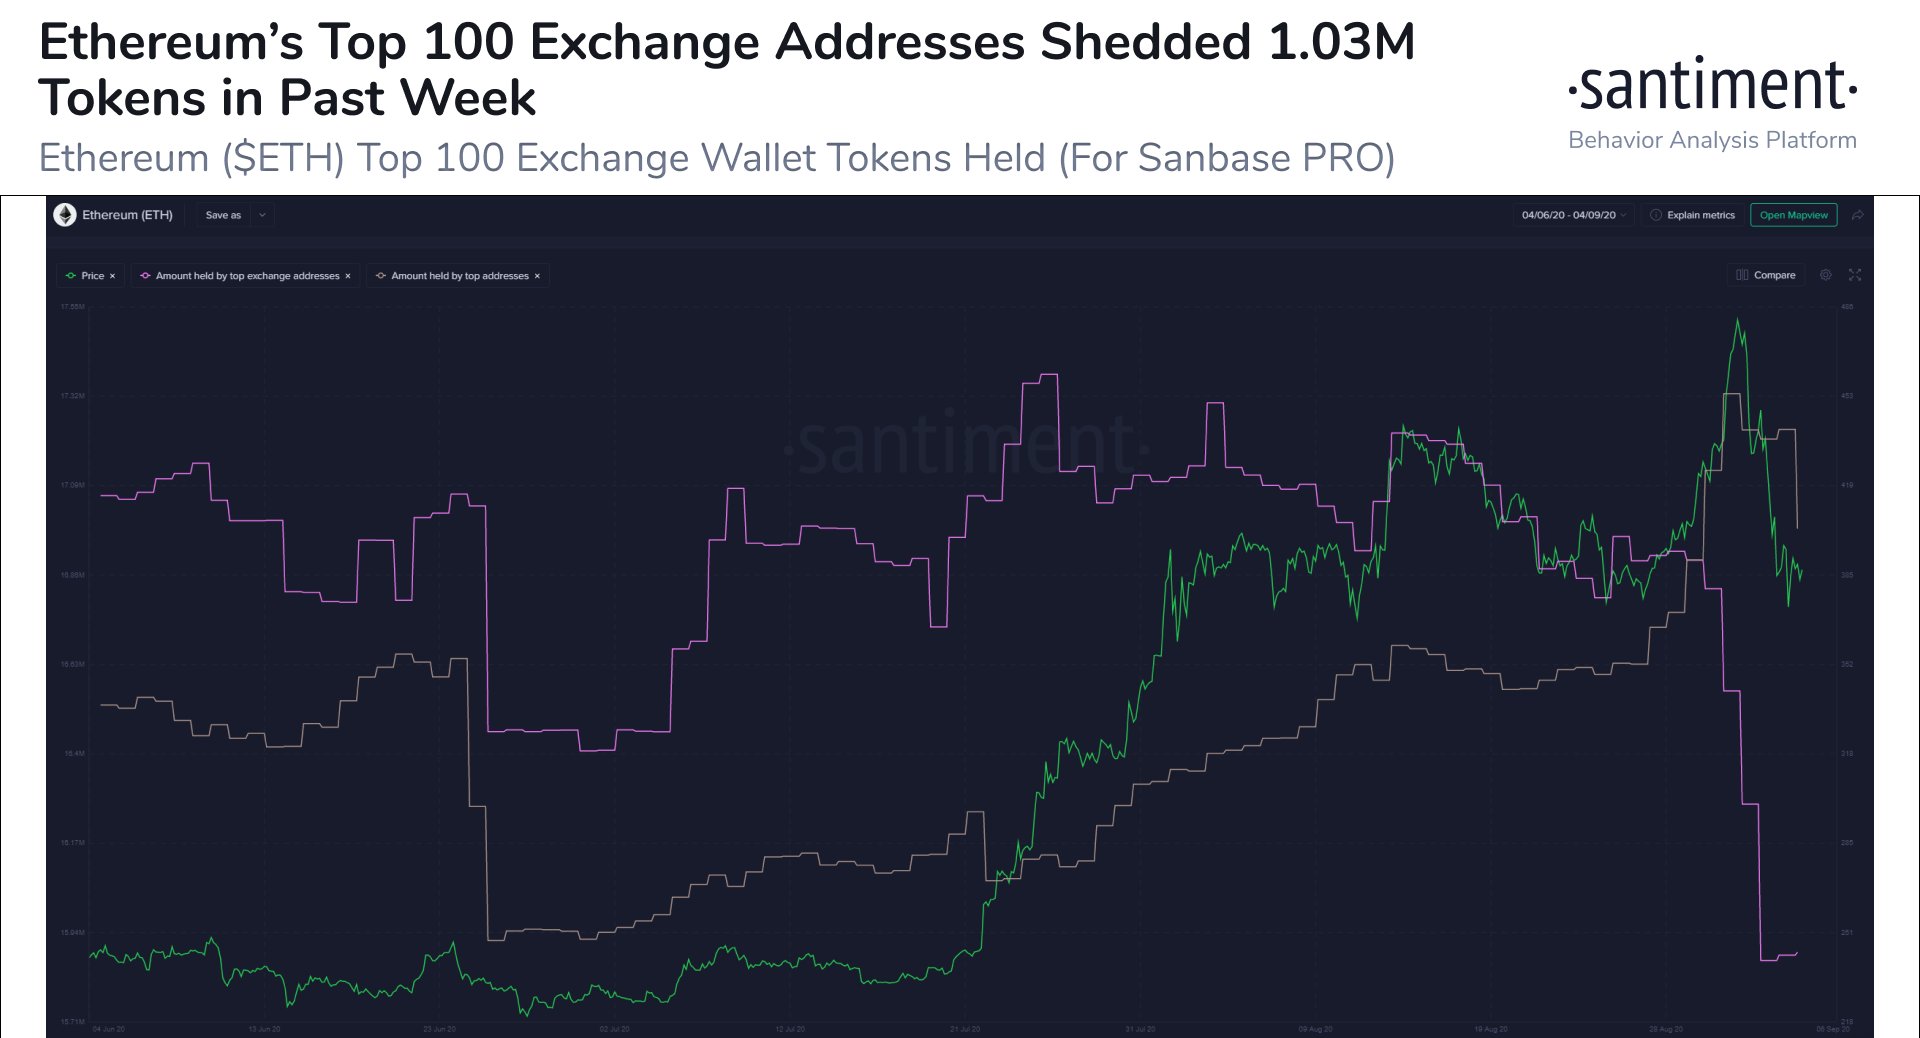 Whales Sold Over 1M ETH Prior To The 35% Price Collapse